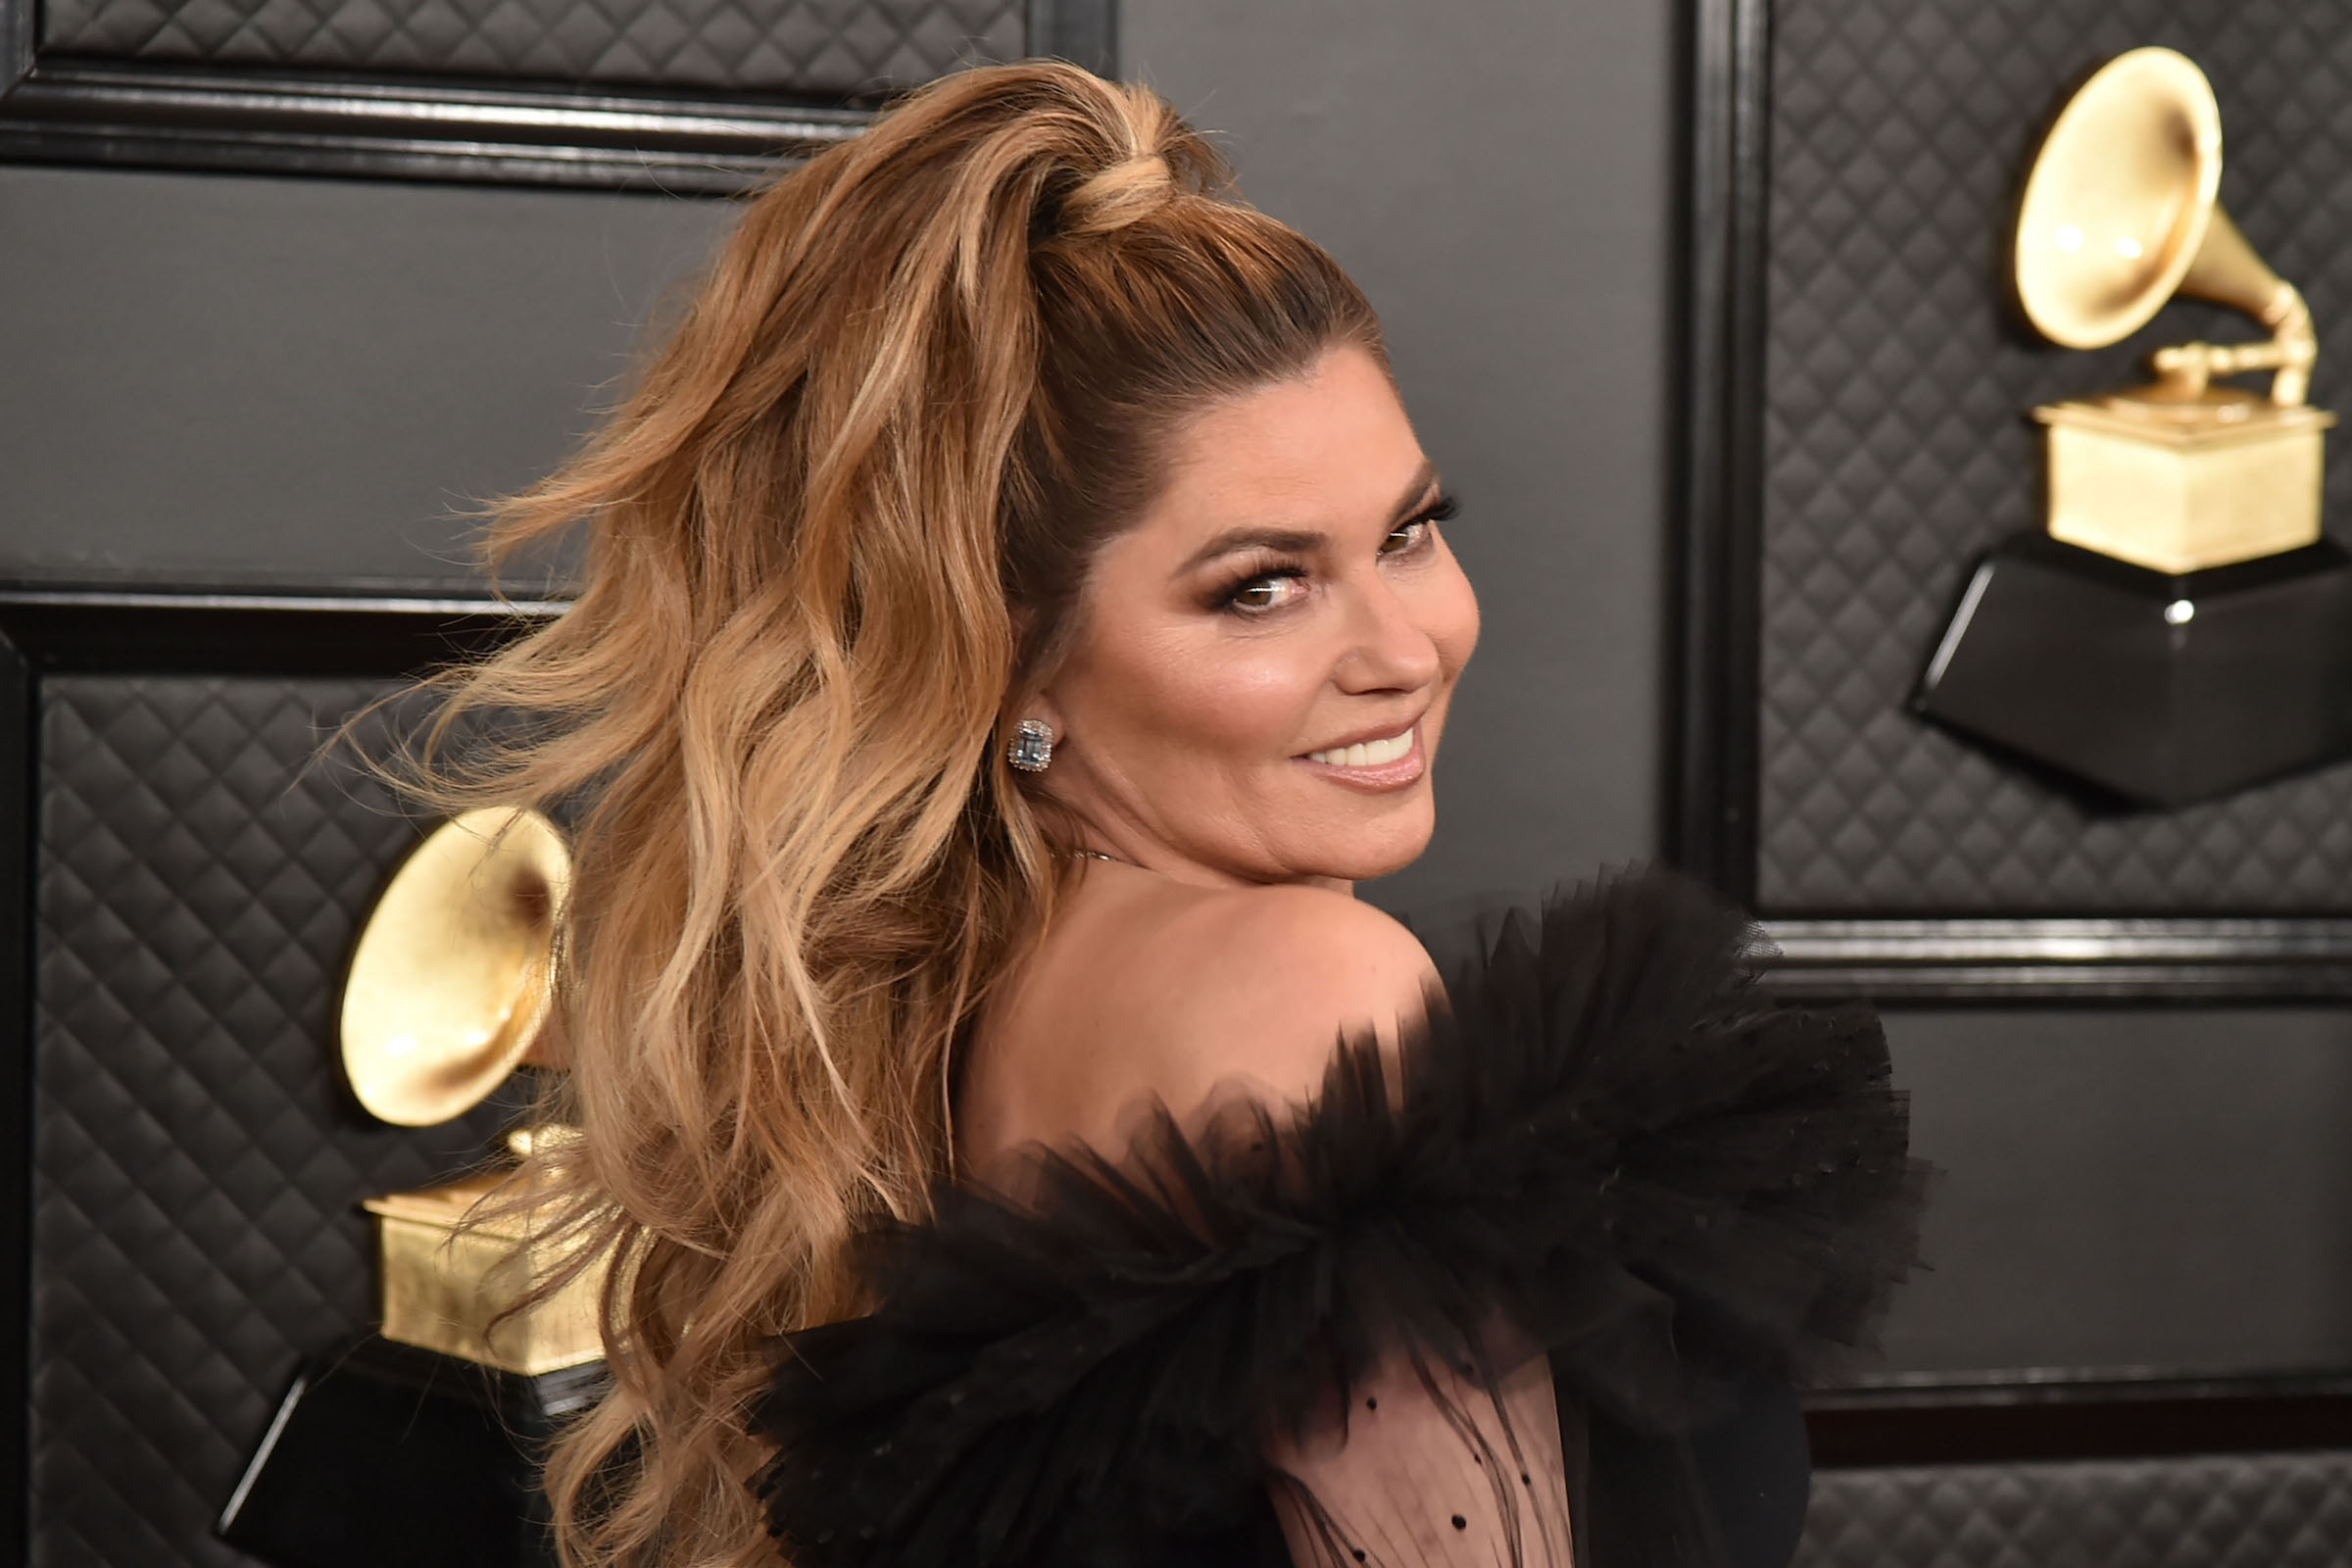 People’s Choice Awards 2022: Shania Twain to Receive Music Icon Award and Perform Greatest Hits Medley